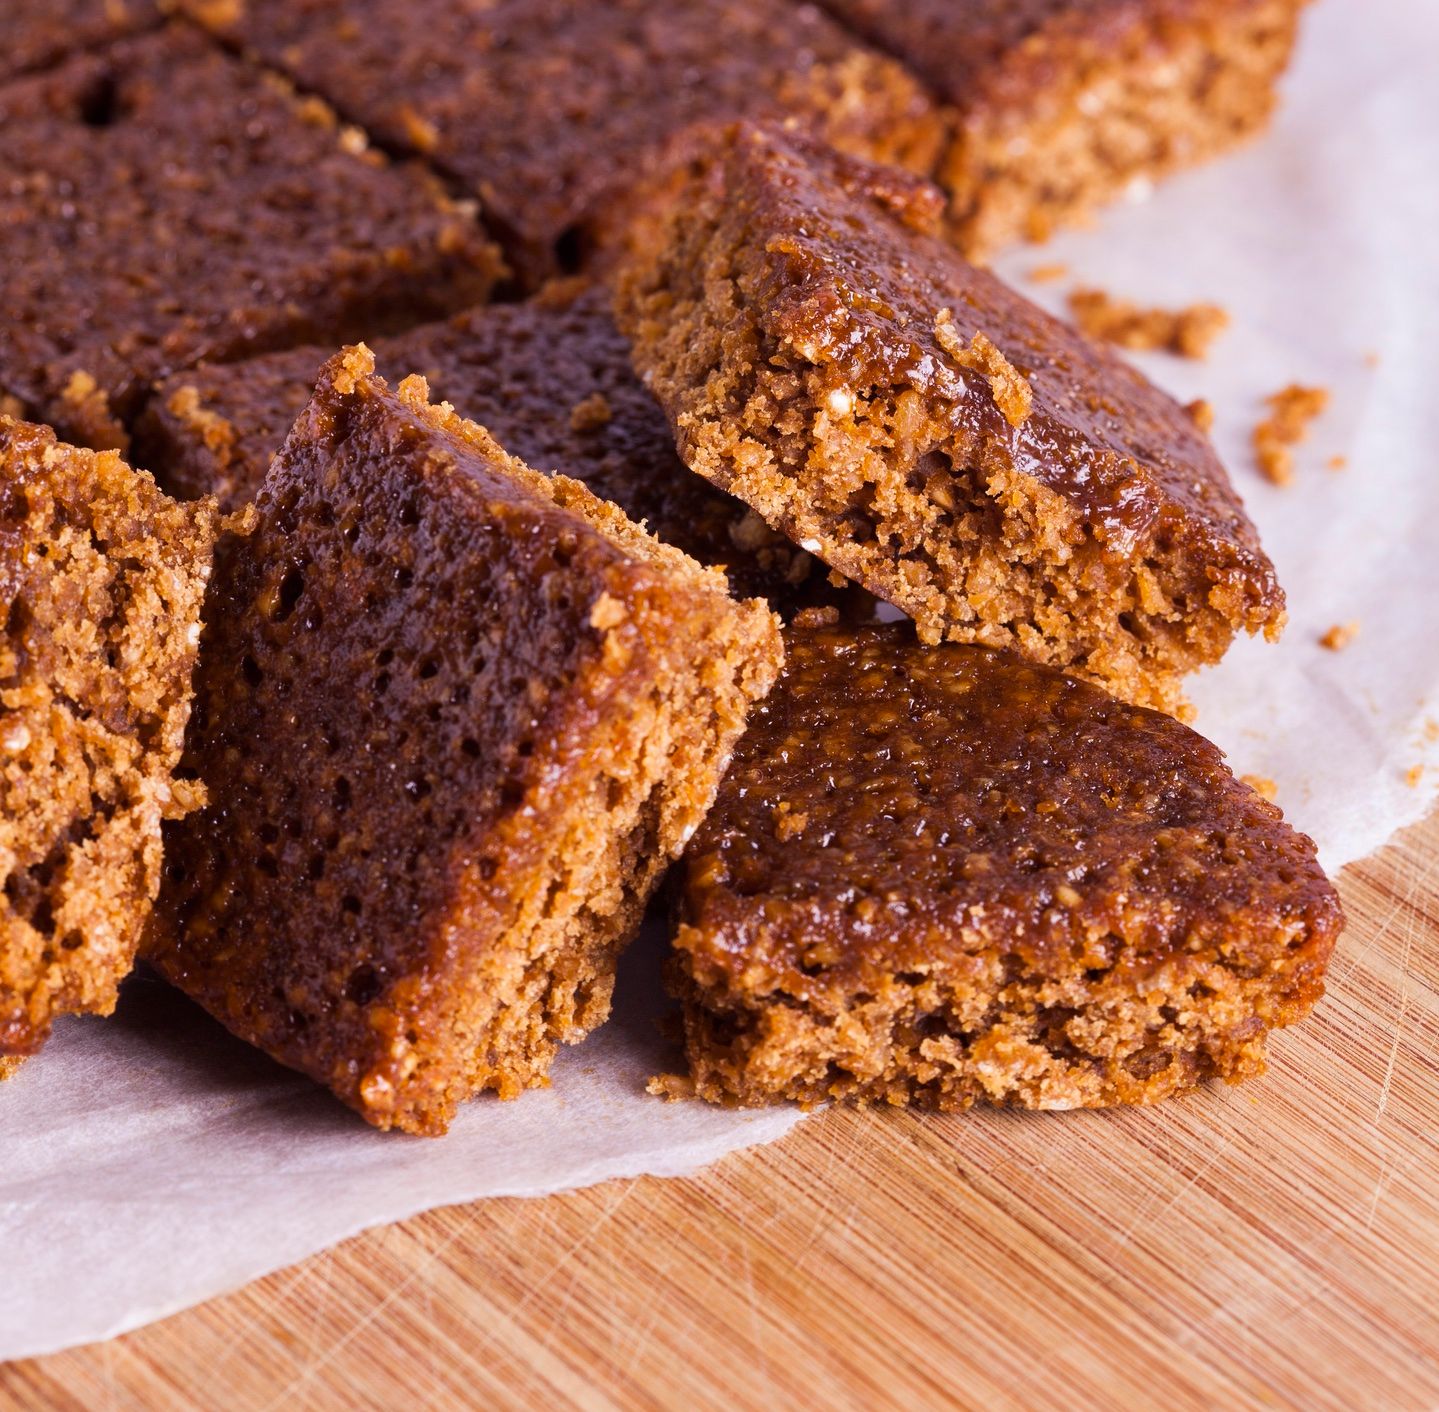 A close up shot of Yorkshire Parkin, a spicy gingerbread made with oats.